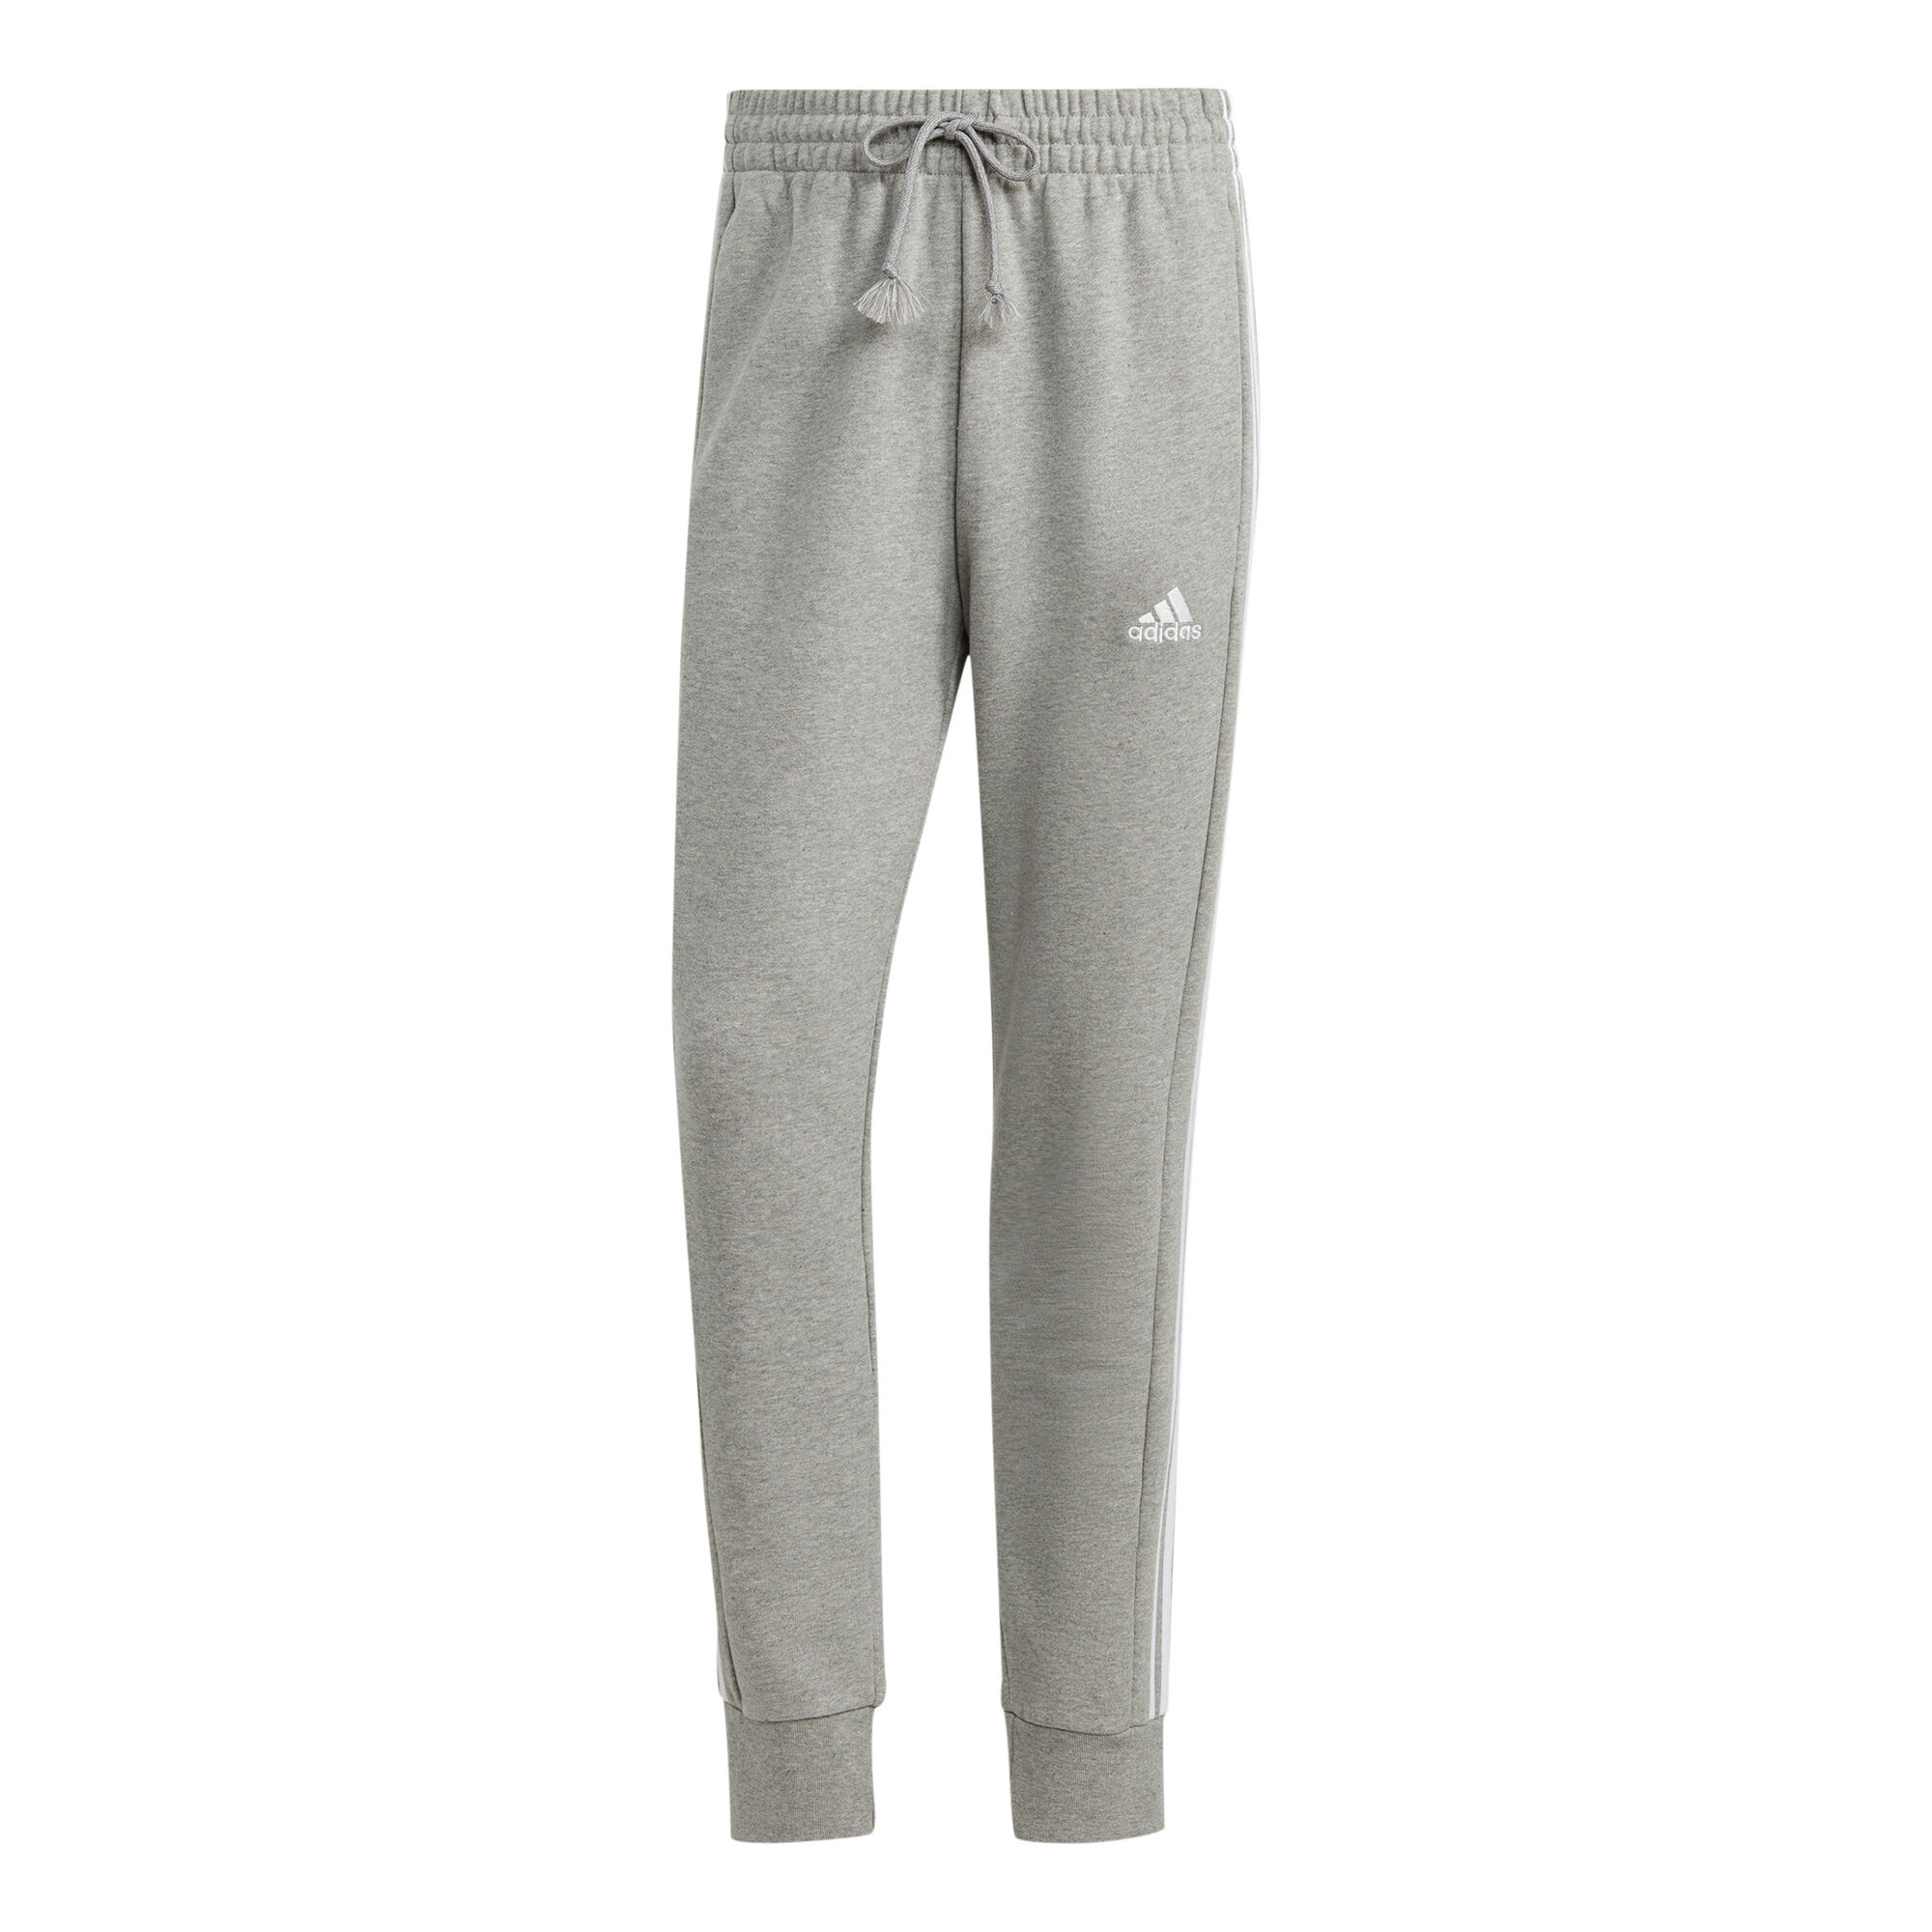 Roots Canada Sweatpants Youth Kids Size 10 Heathered Gray Joggers Track  Pants